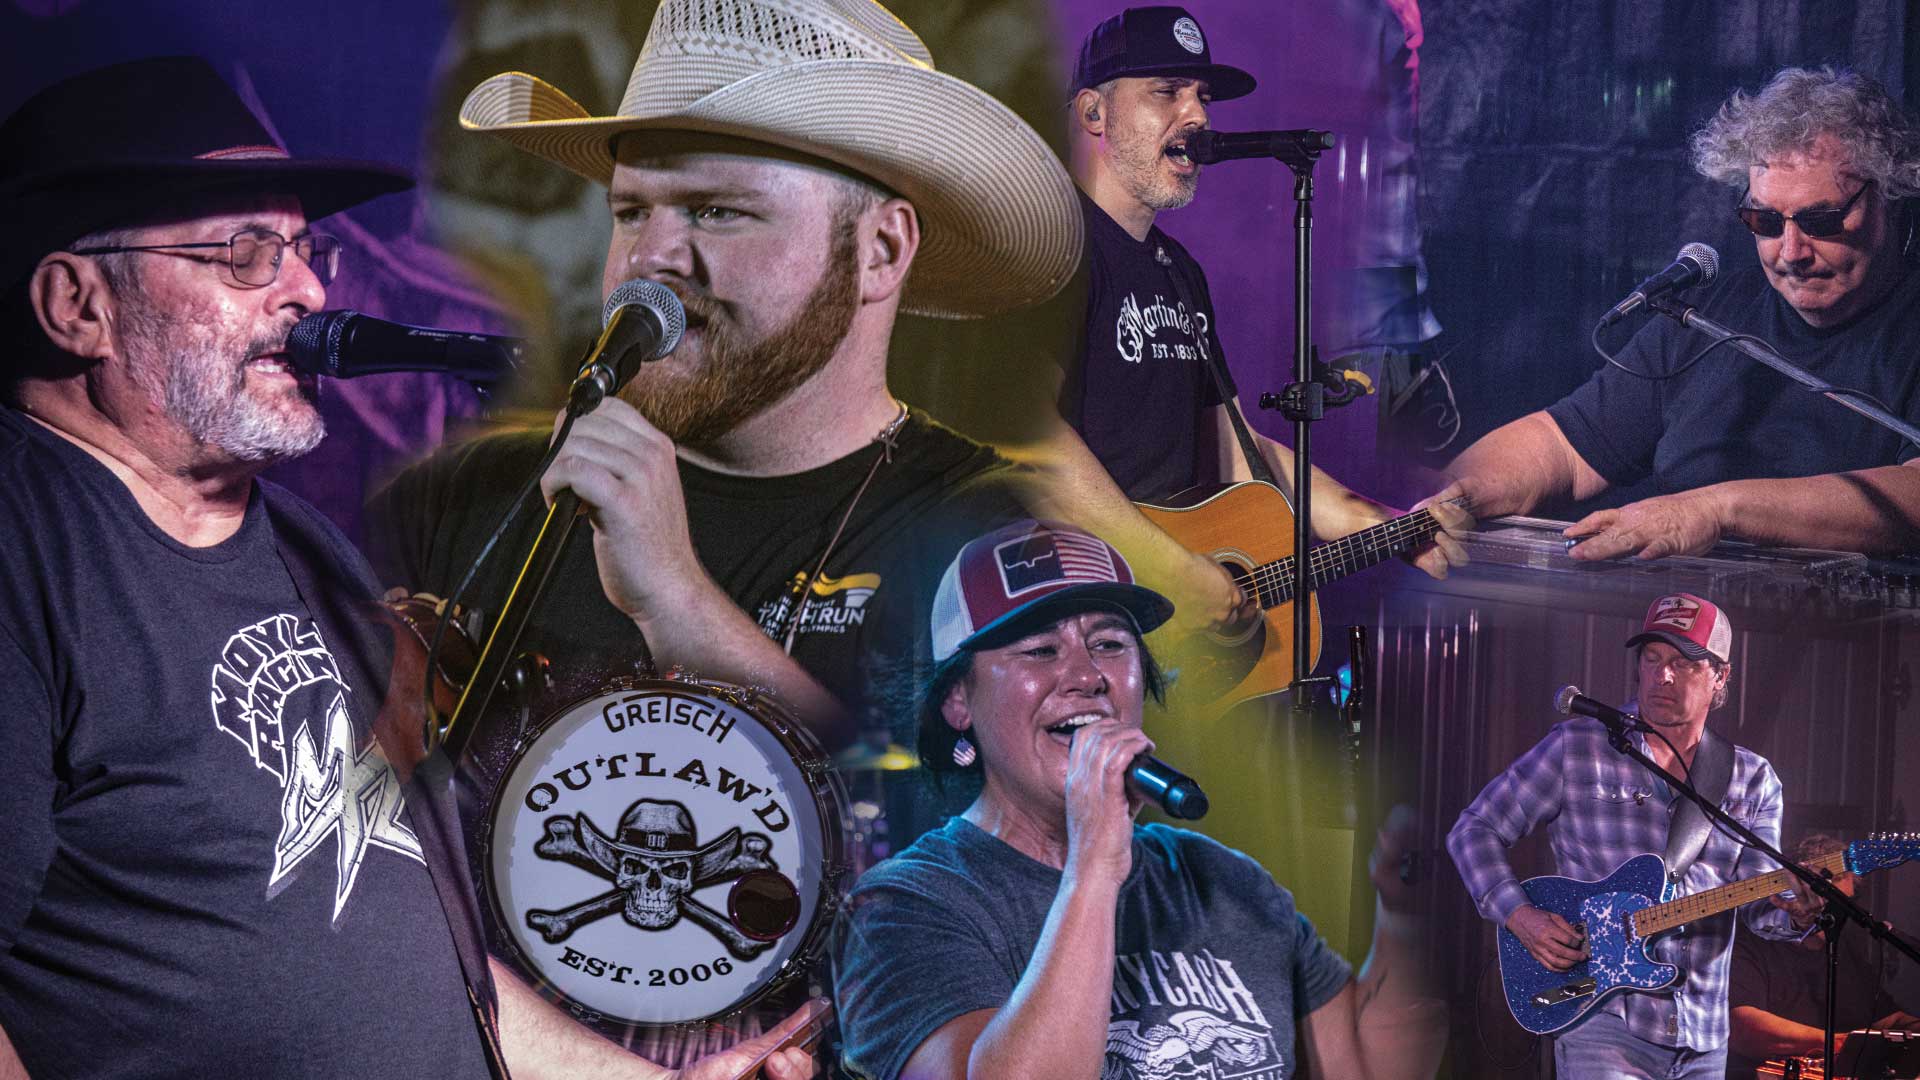 Outlawd band comes to Kountry Bar